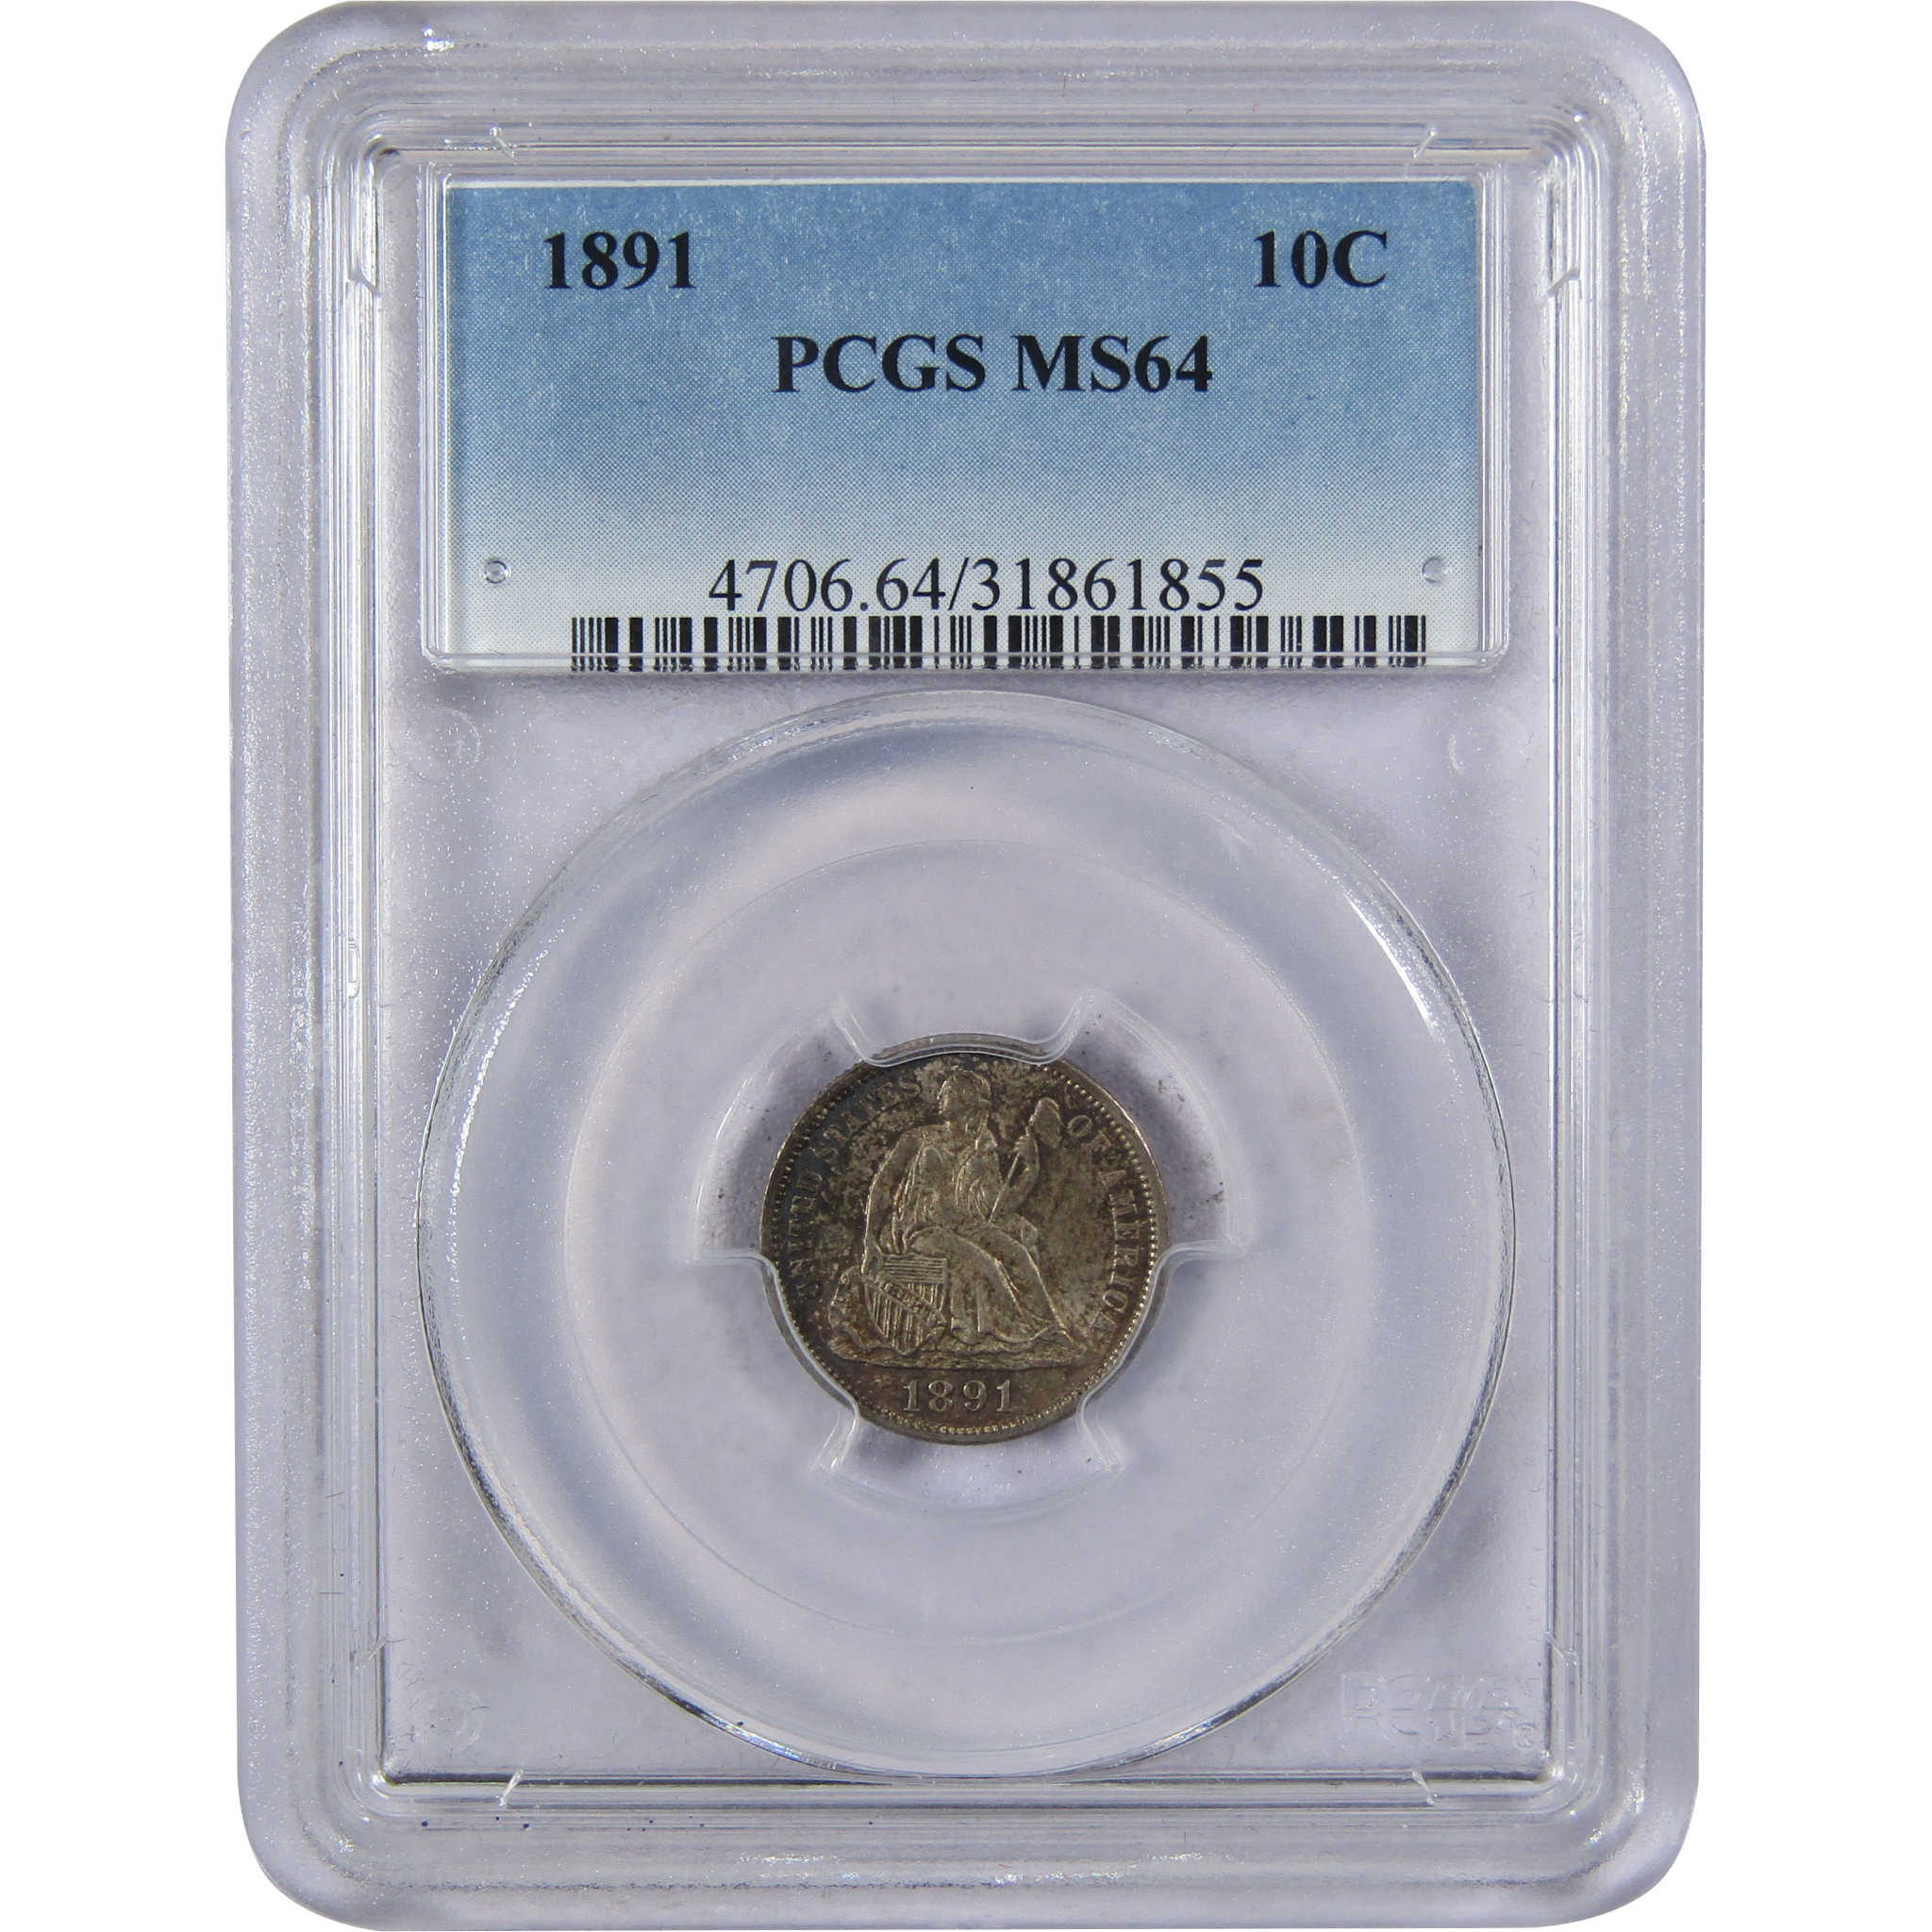 1891 Seated Liberty Dime MS 64 PCGS Silver 10c Uncirculated SKU:I861